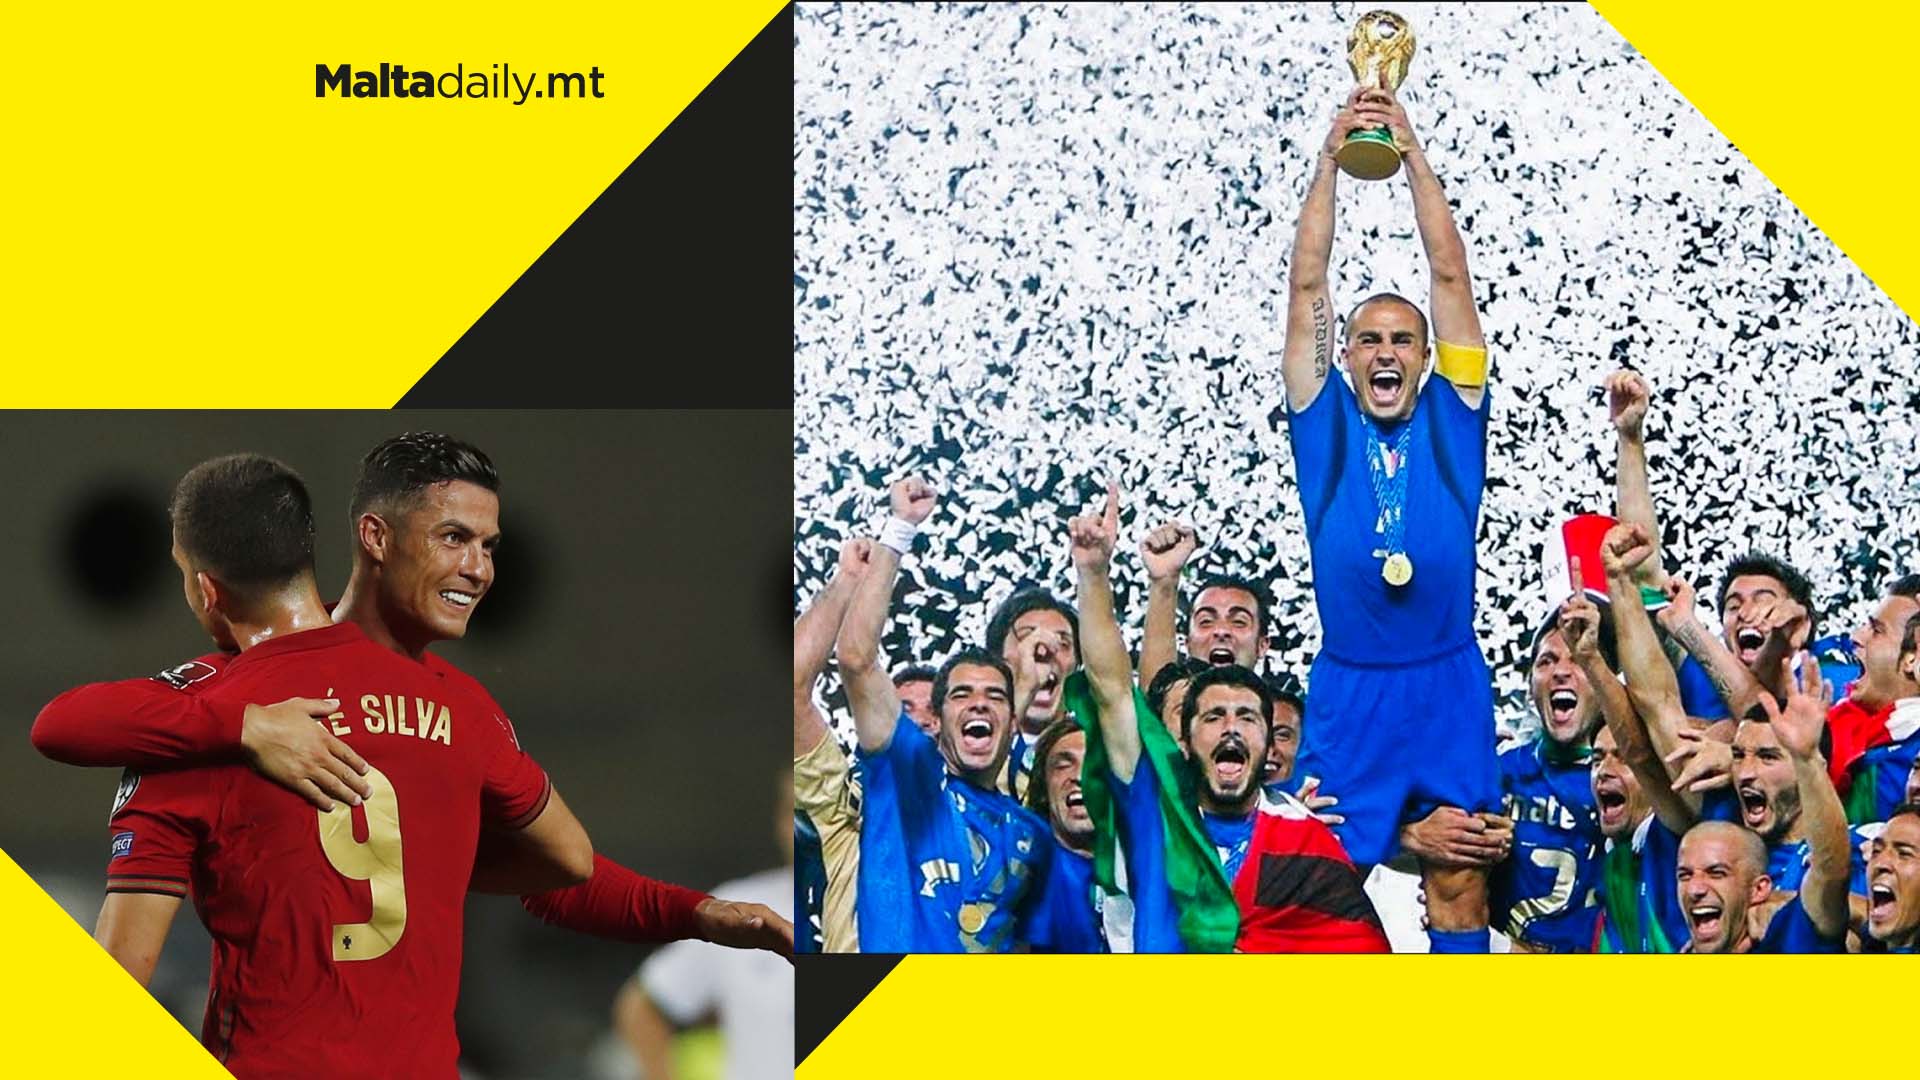 European champions Italy may face Portugal for a World Cup spot next year